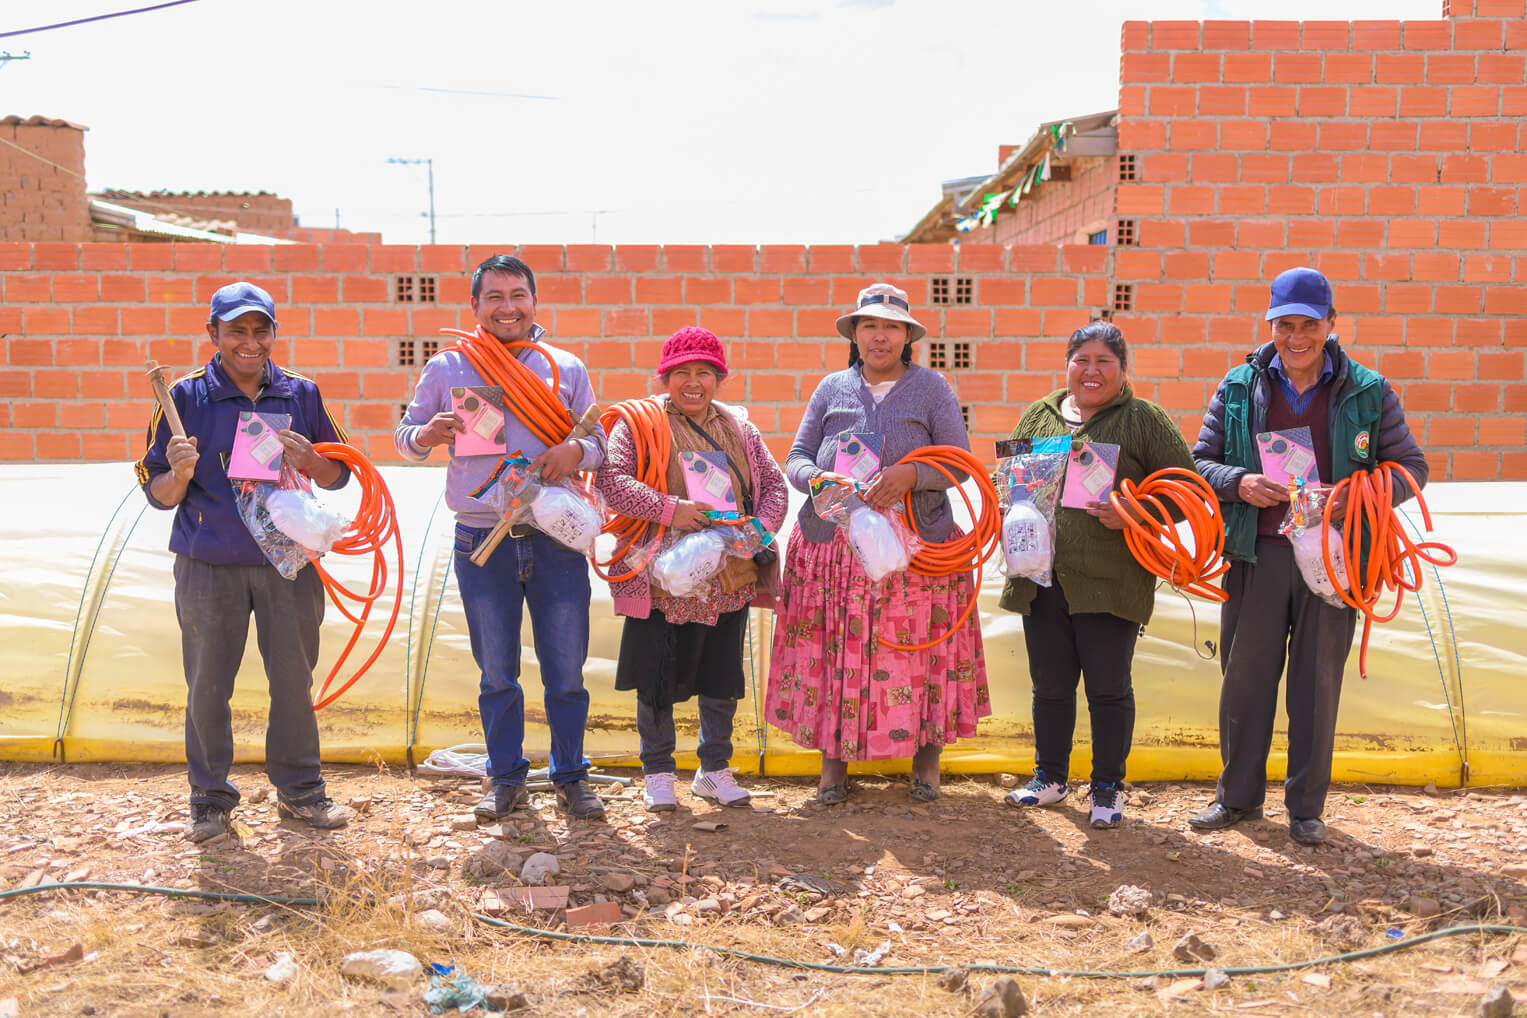 We supplied residents with all the materials and training they needed to grow in micro tunnels in El Alto.